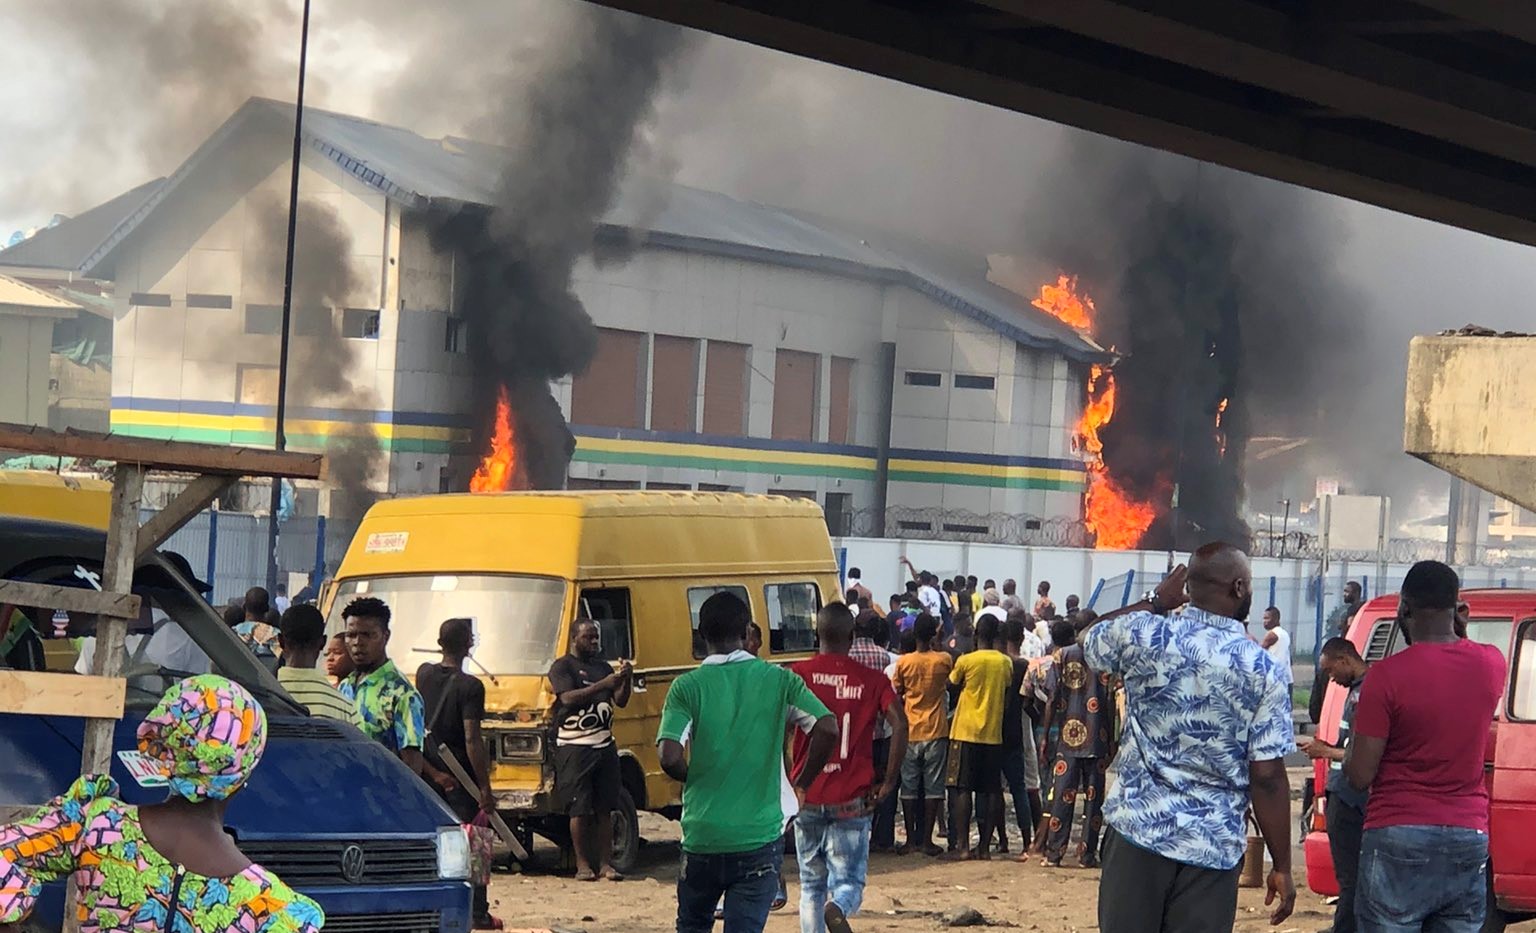 Another police station set on fire in Lagos